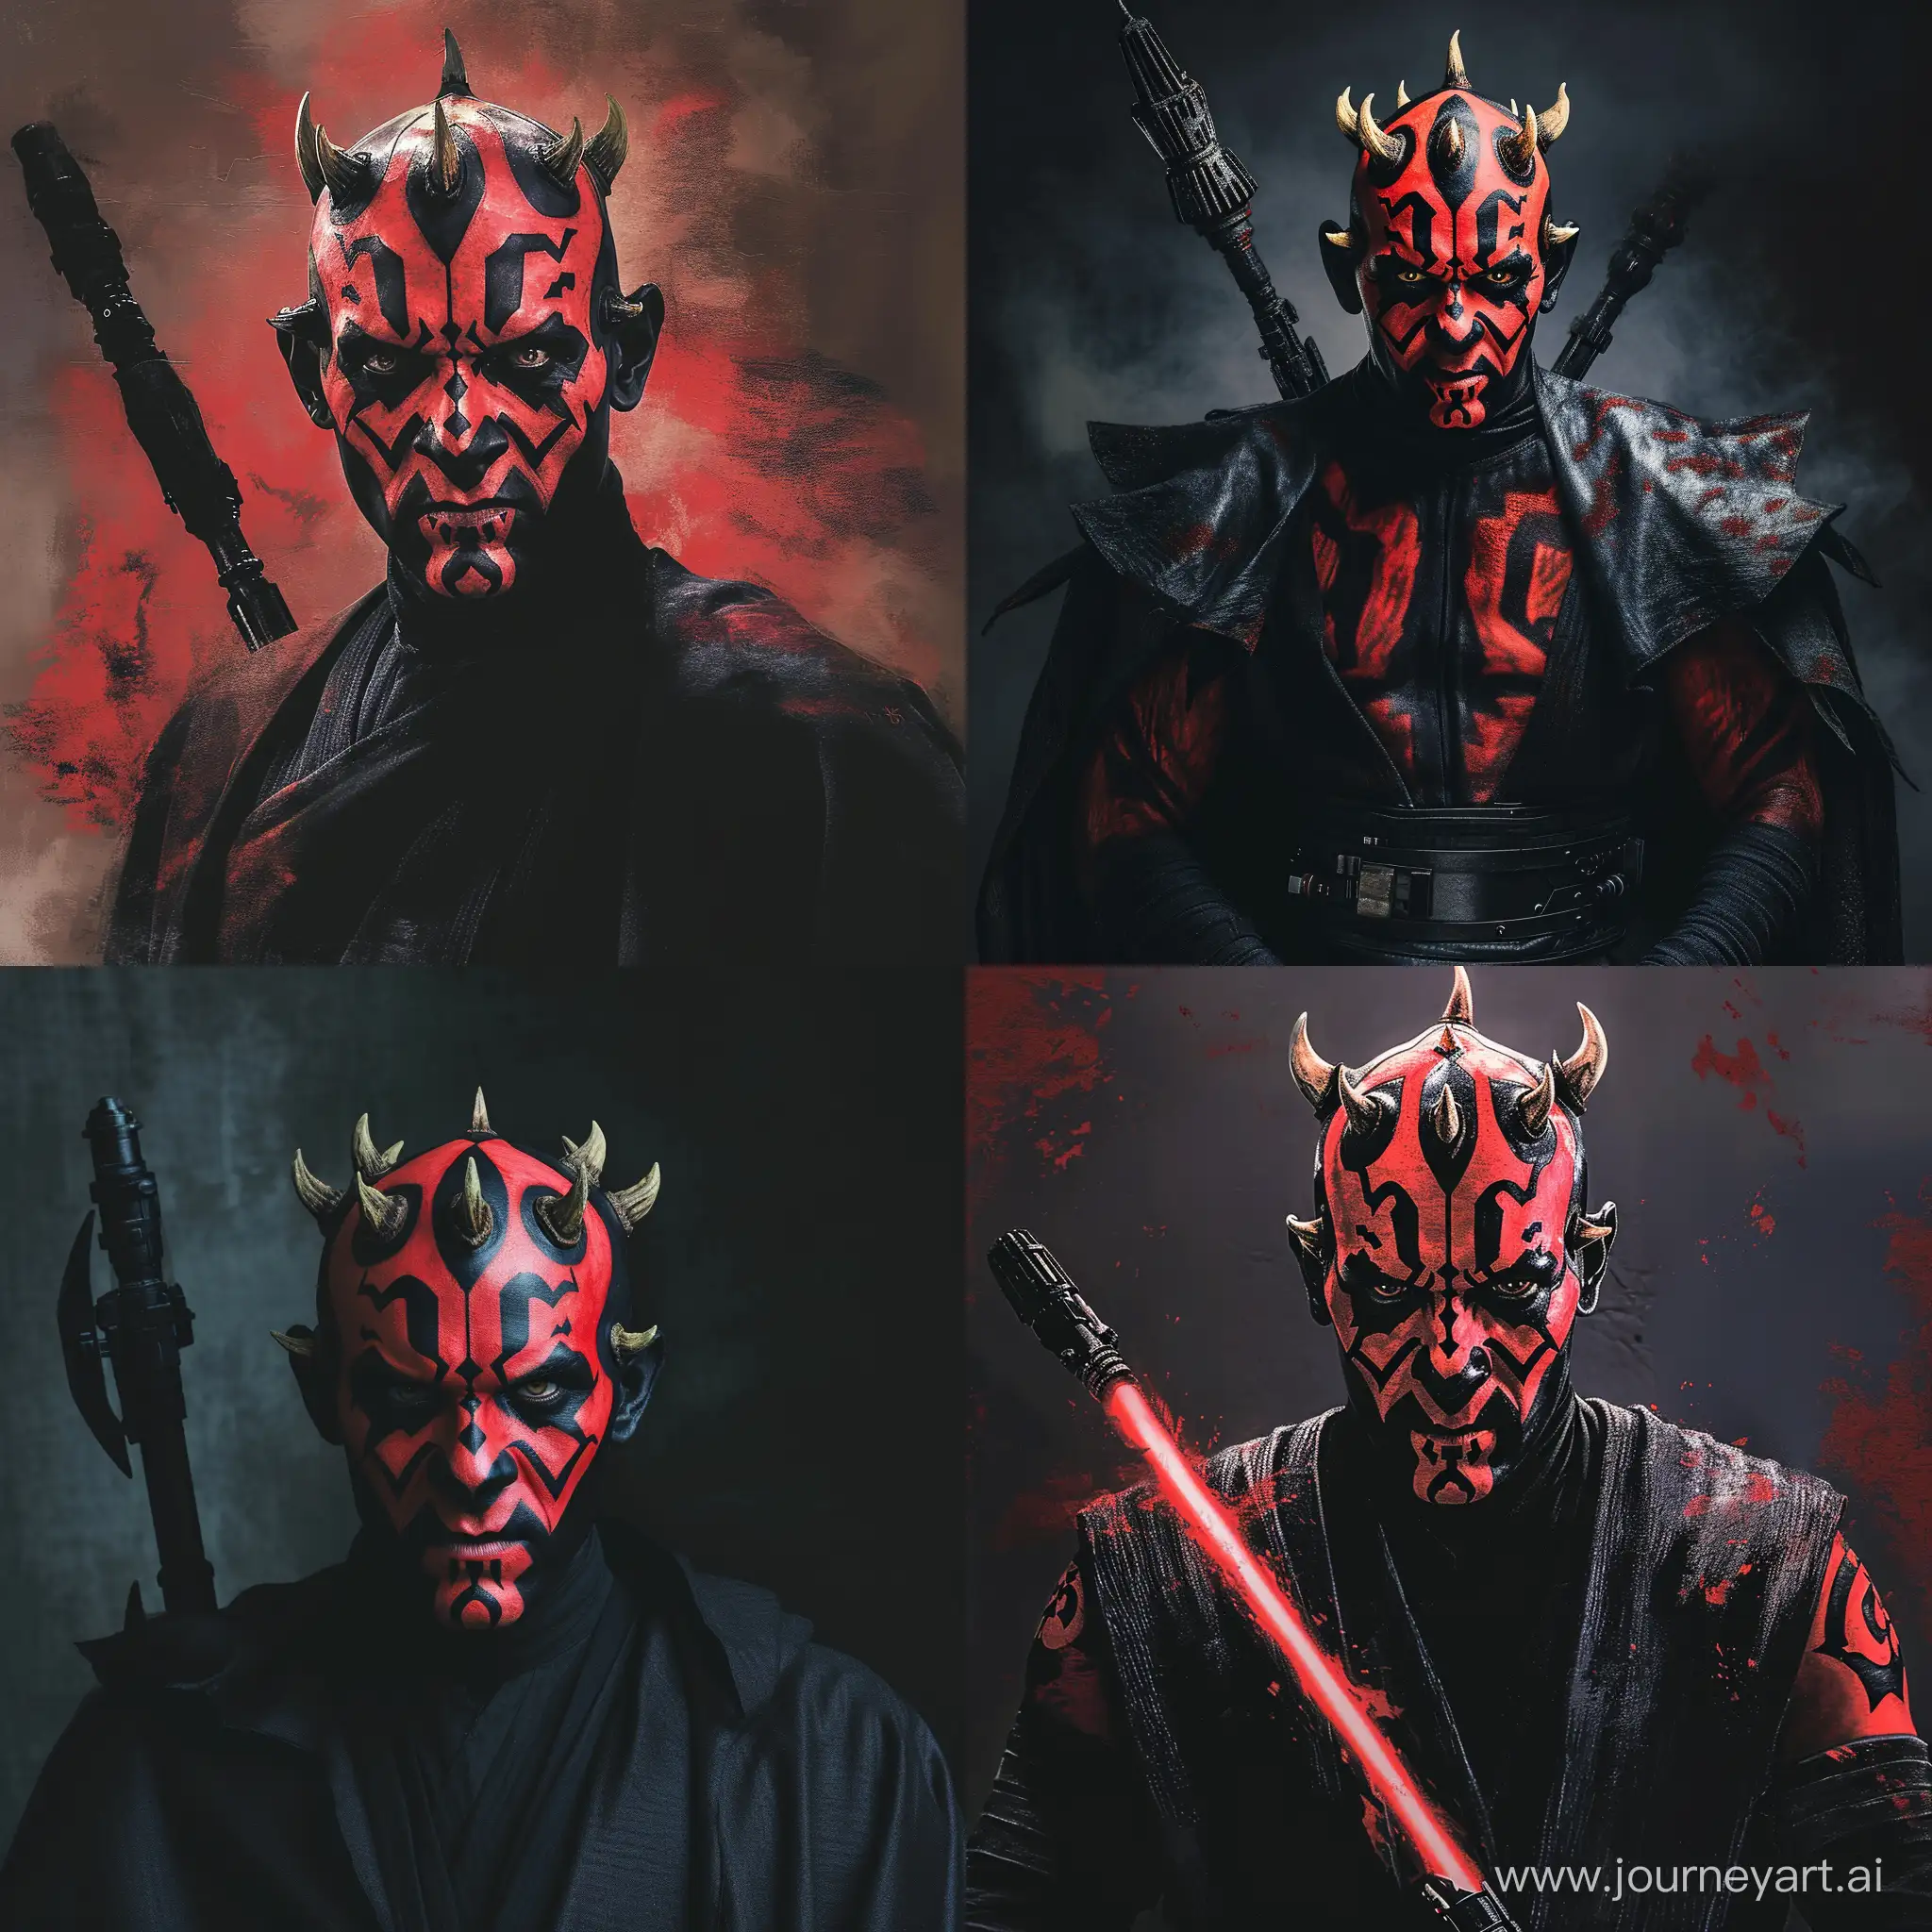 Generate an image where Sam Witwer transforms into the menacing character Darth Maul from Star Wars. Capture the fierce and intimidating presence of Darth Maul, with Sam Witwer embodying the Sith Lord's iconic red and black appearance. Pay close attention to the details of Maul's facial markings, horns, and the double-bladed lightsaber. Ensure that Sam Witwer brings intensity and a sense of controlled aggression to the portrayal, staying true to the character's dark and formidable nature.